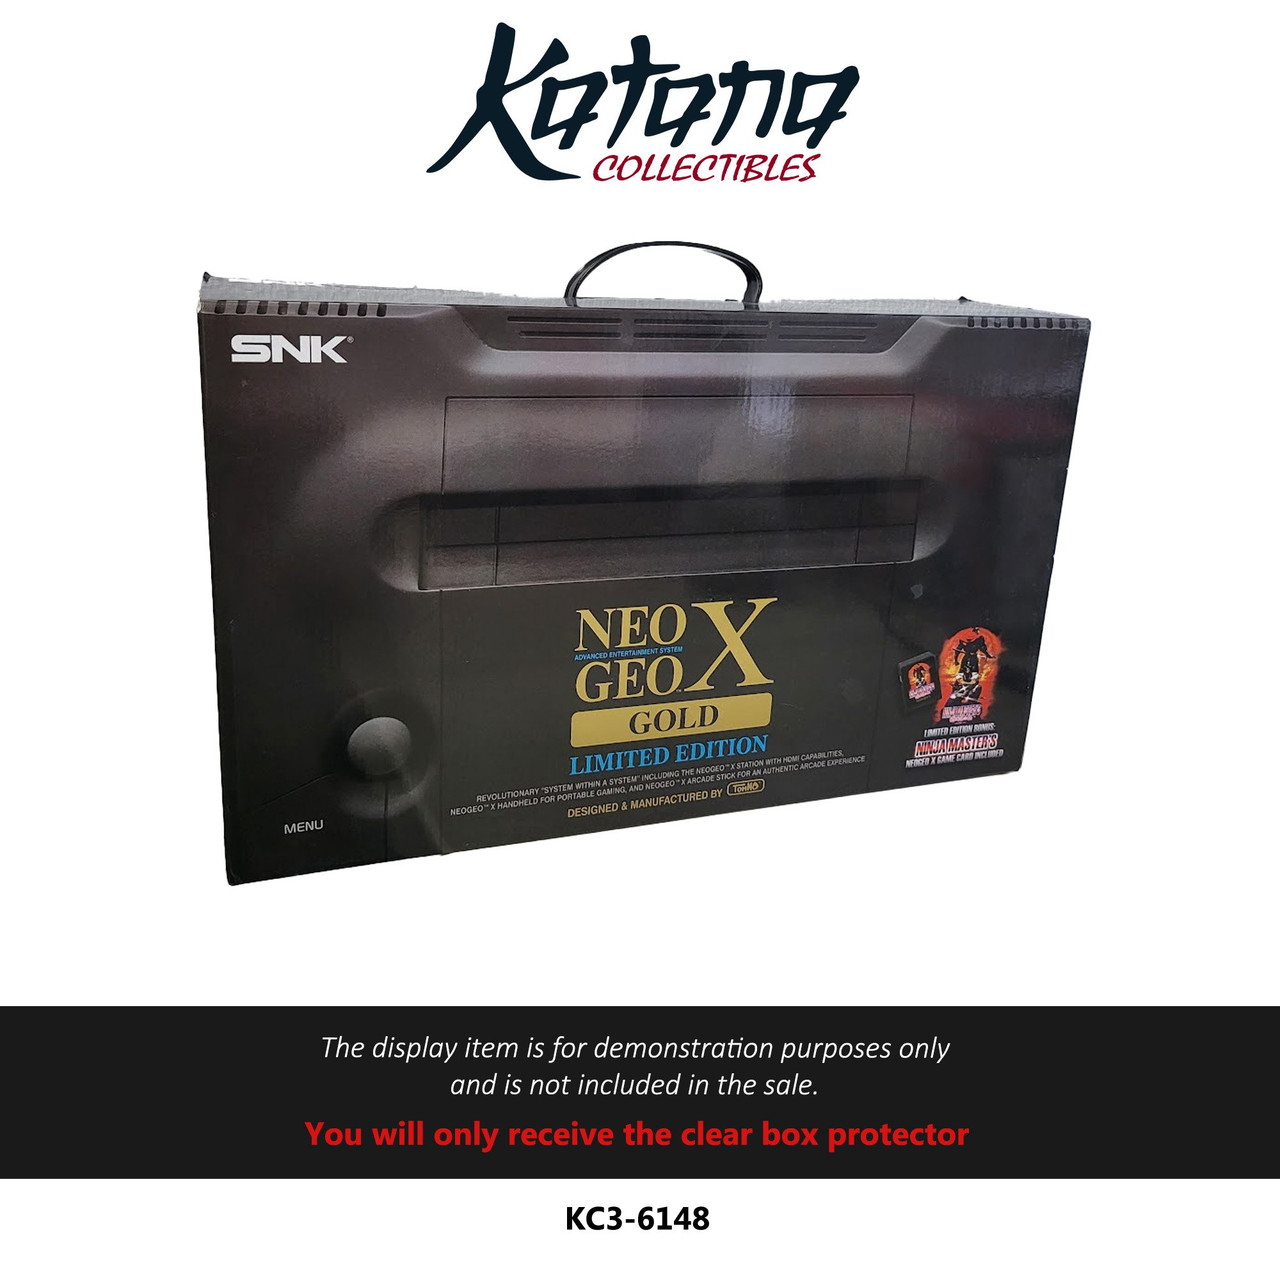 Katana Collectibles Protector For NEO Geo X Gold LE with Extra Space For Handle